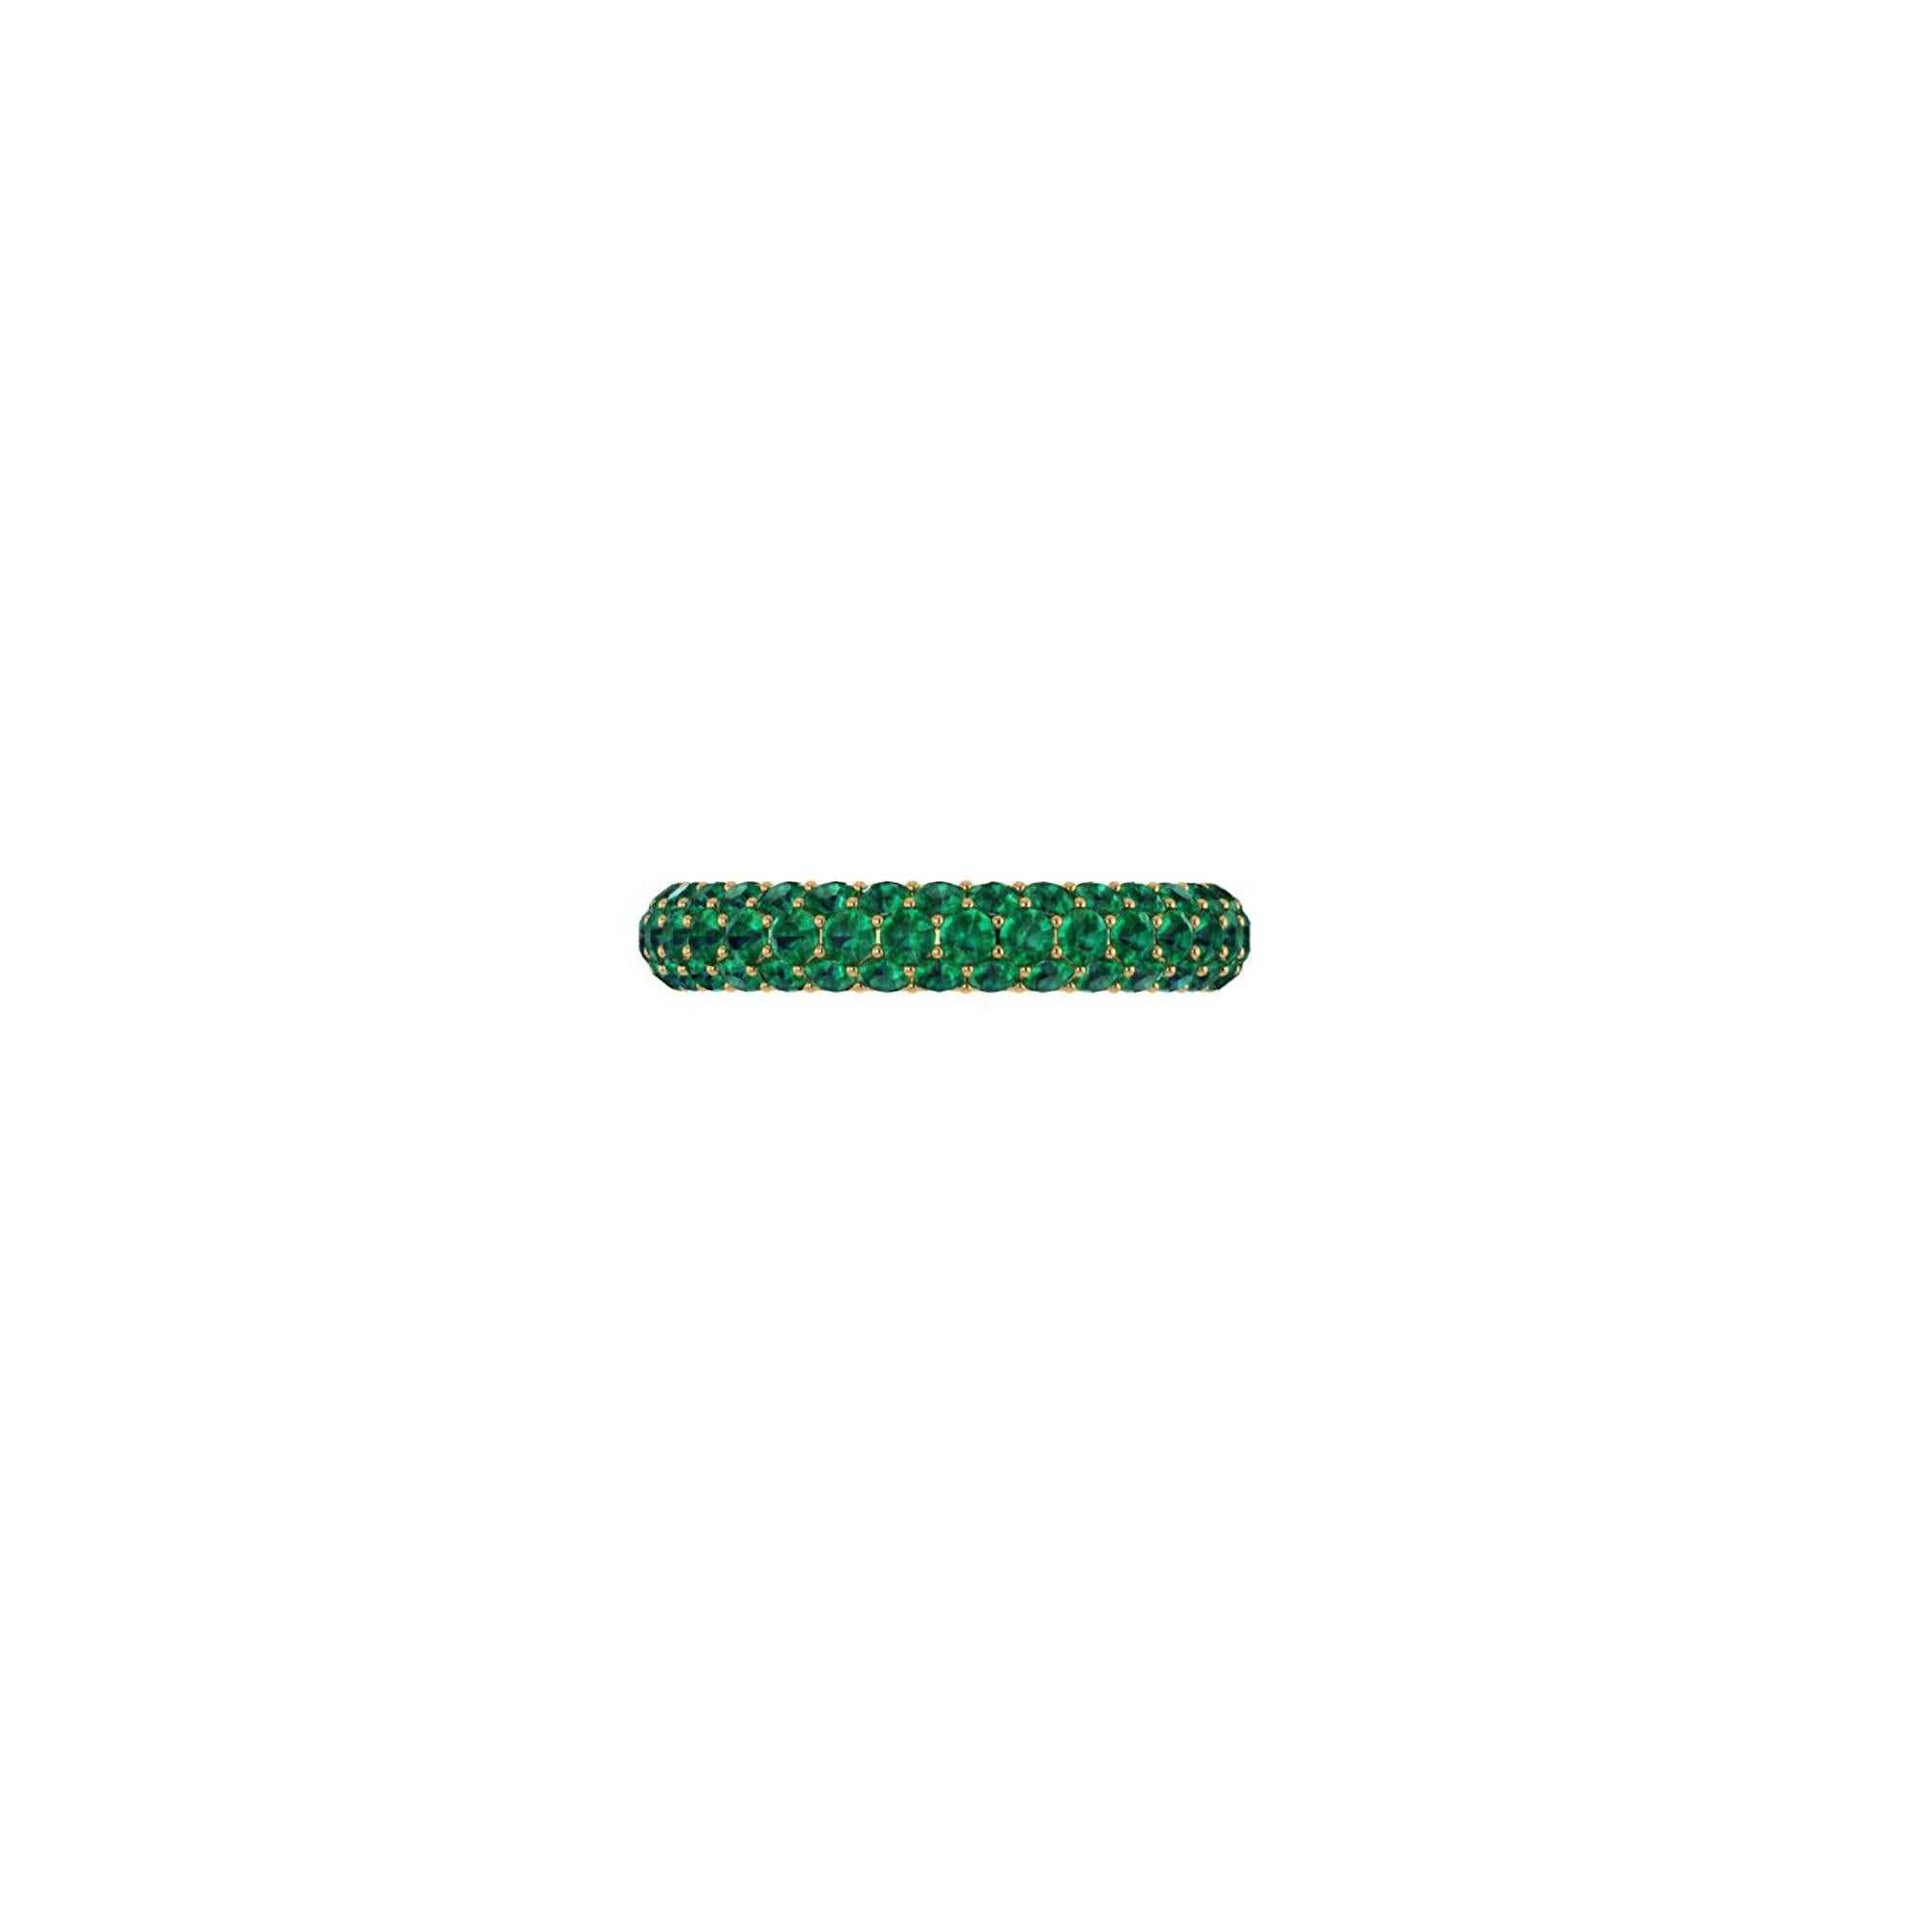 emerald pave ring